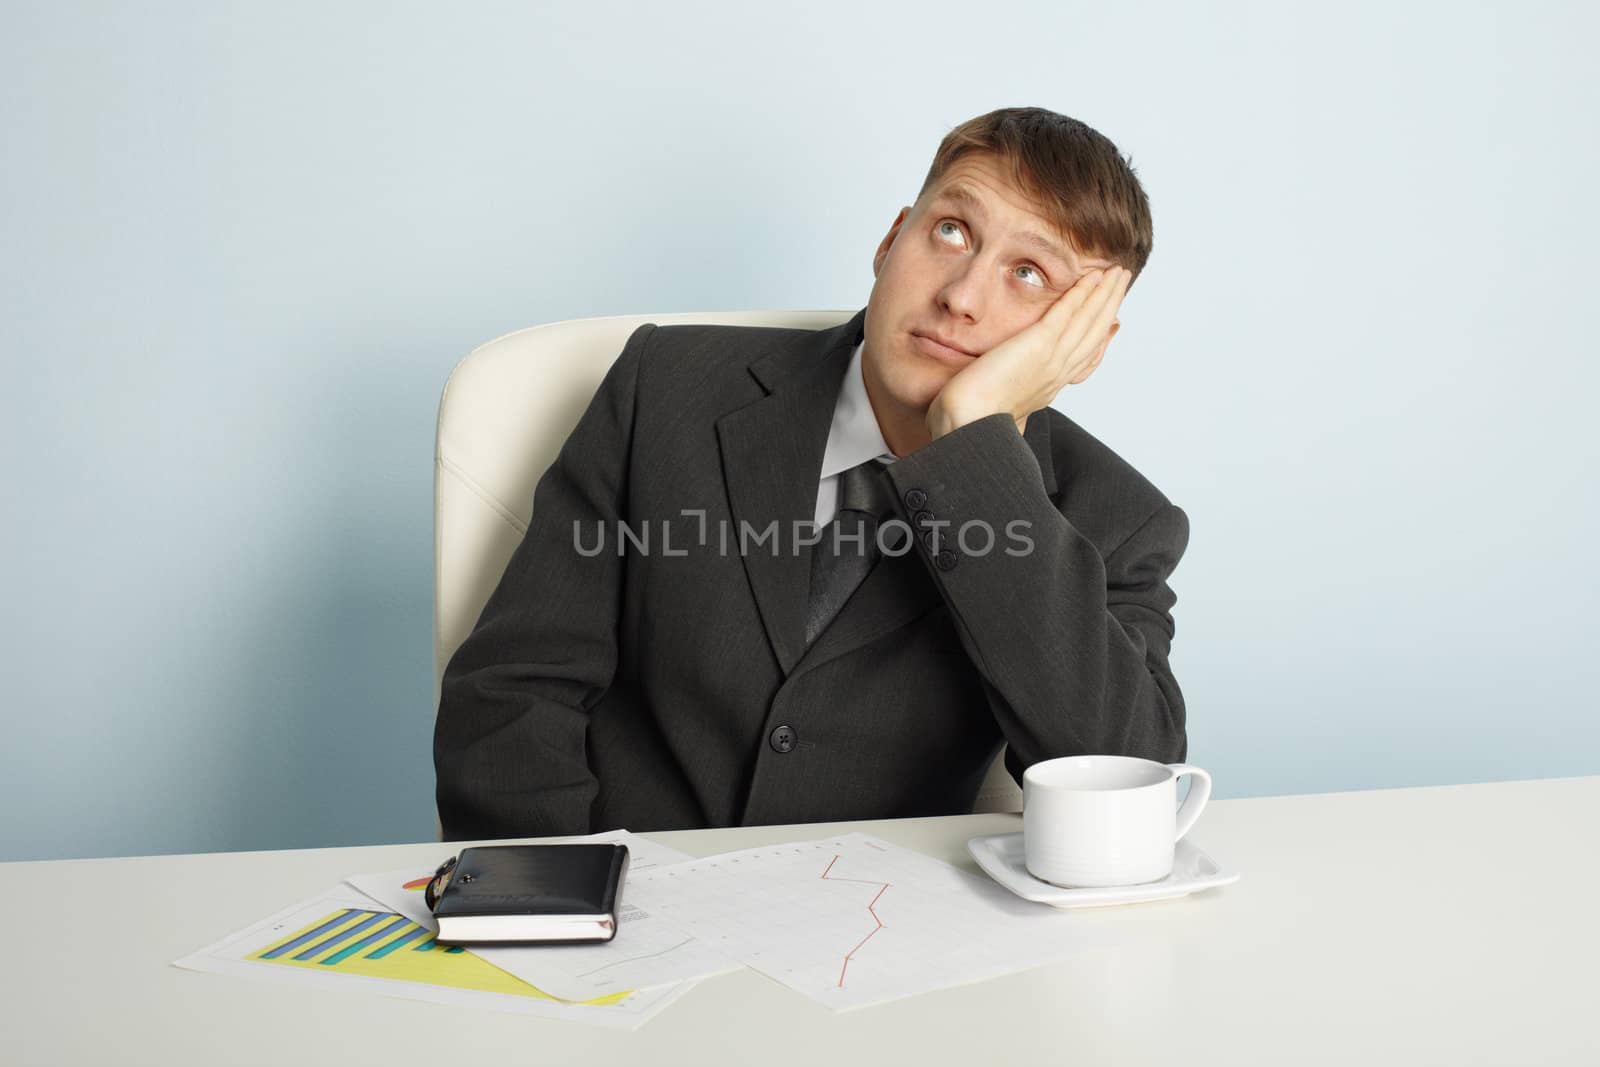 The businessman pensively looks upwards sitting at a table